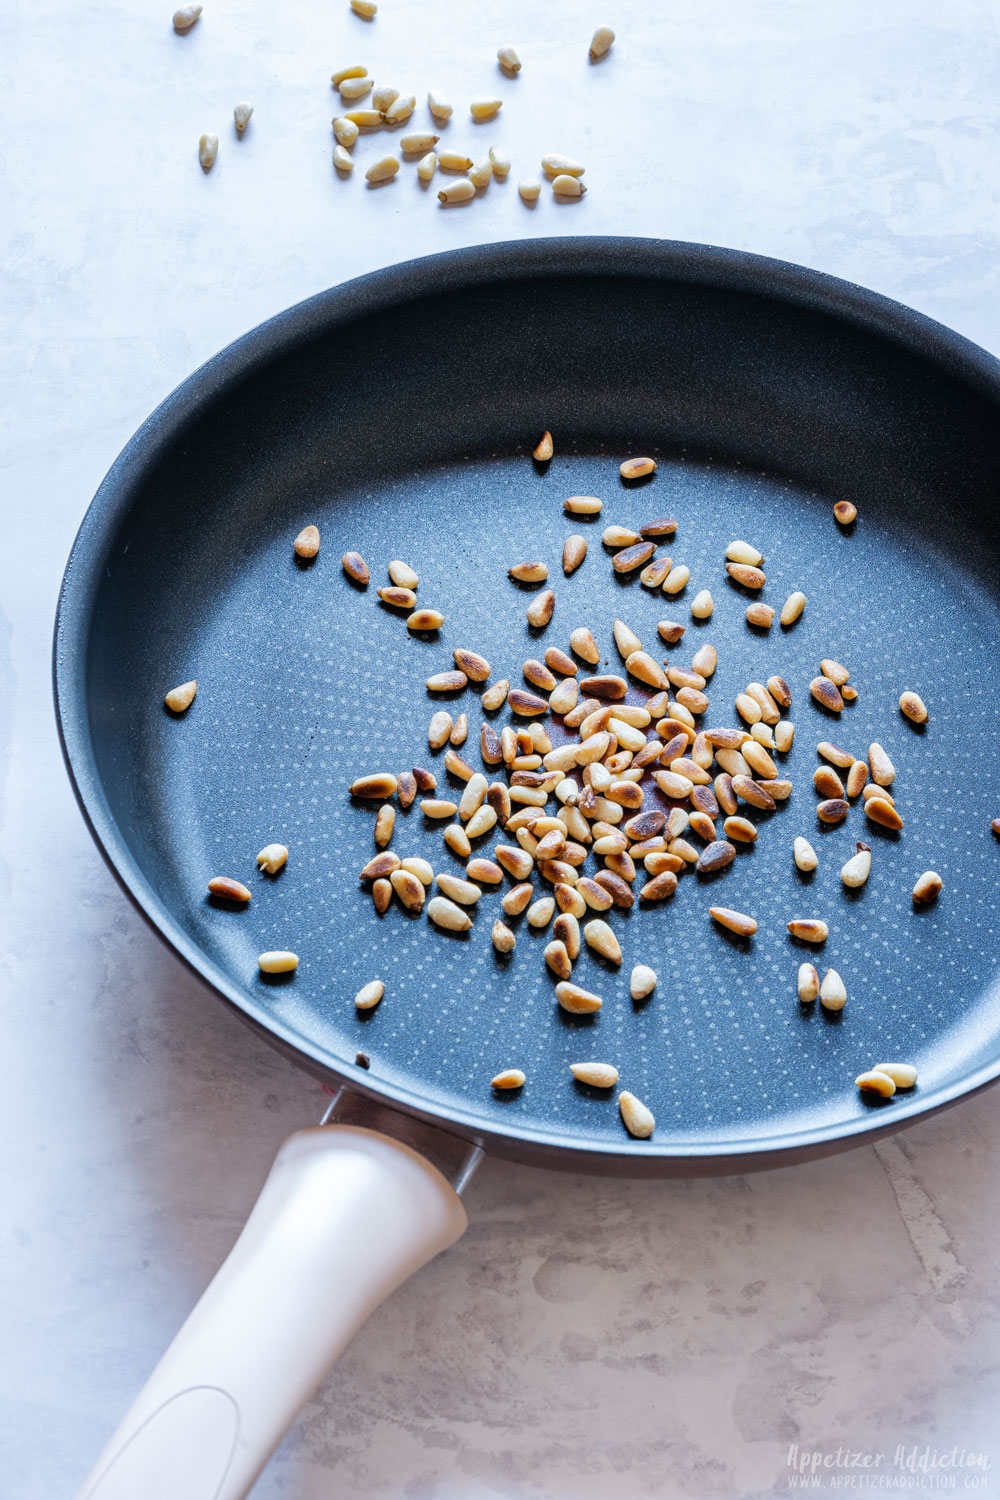 Toasting pine nuts on the pan.